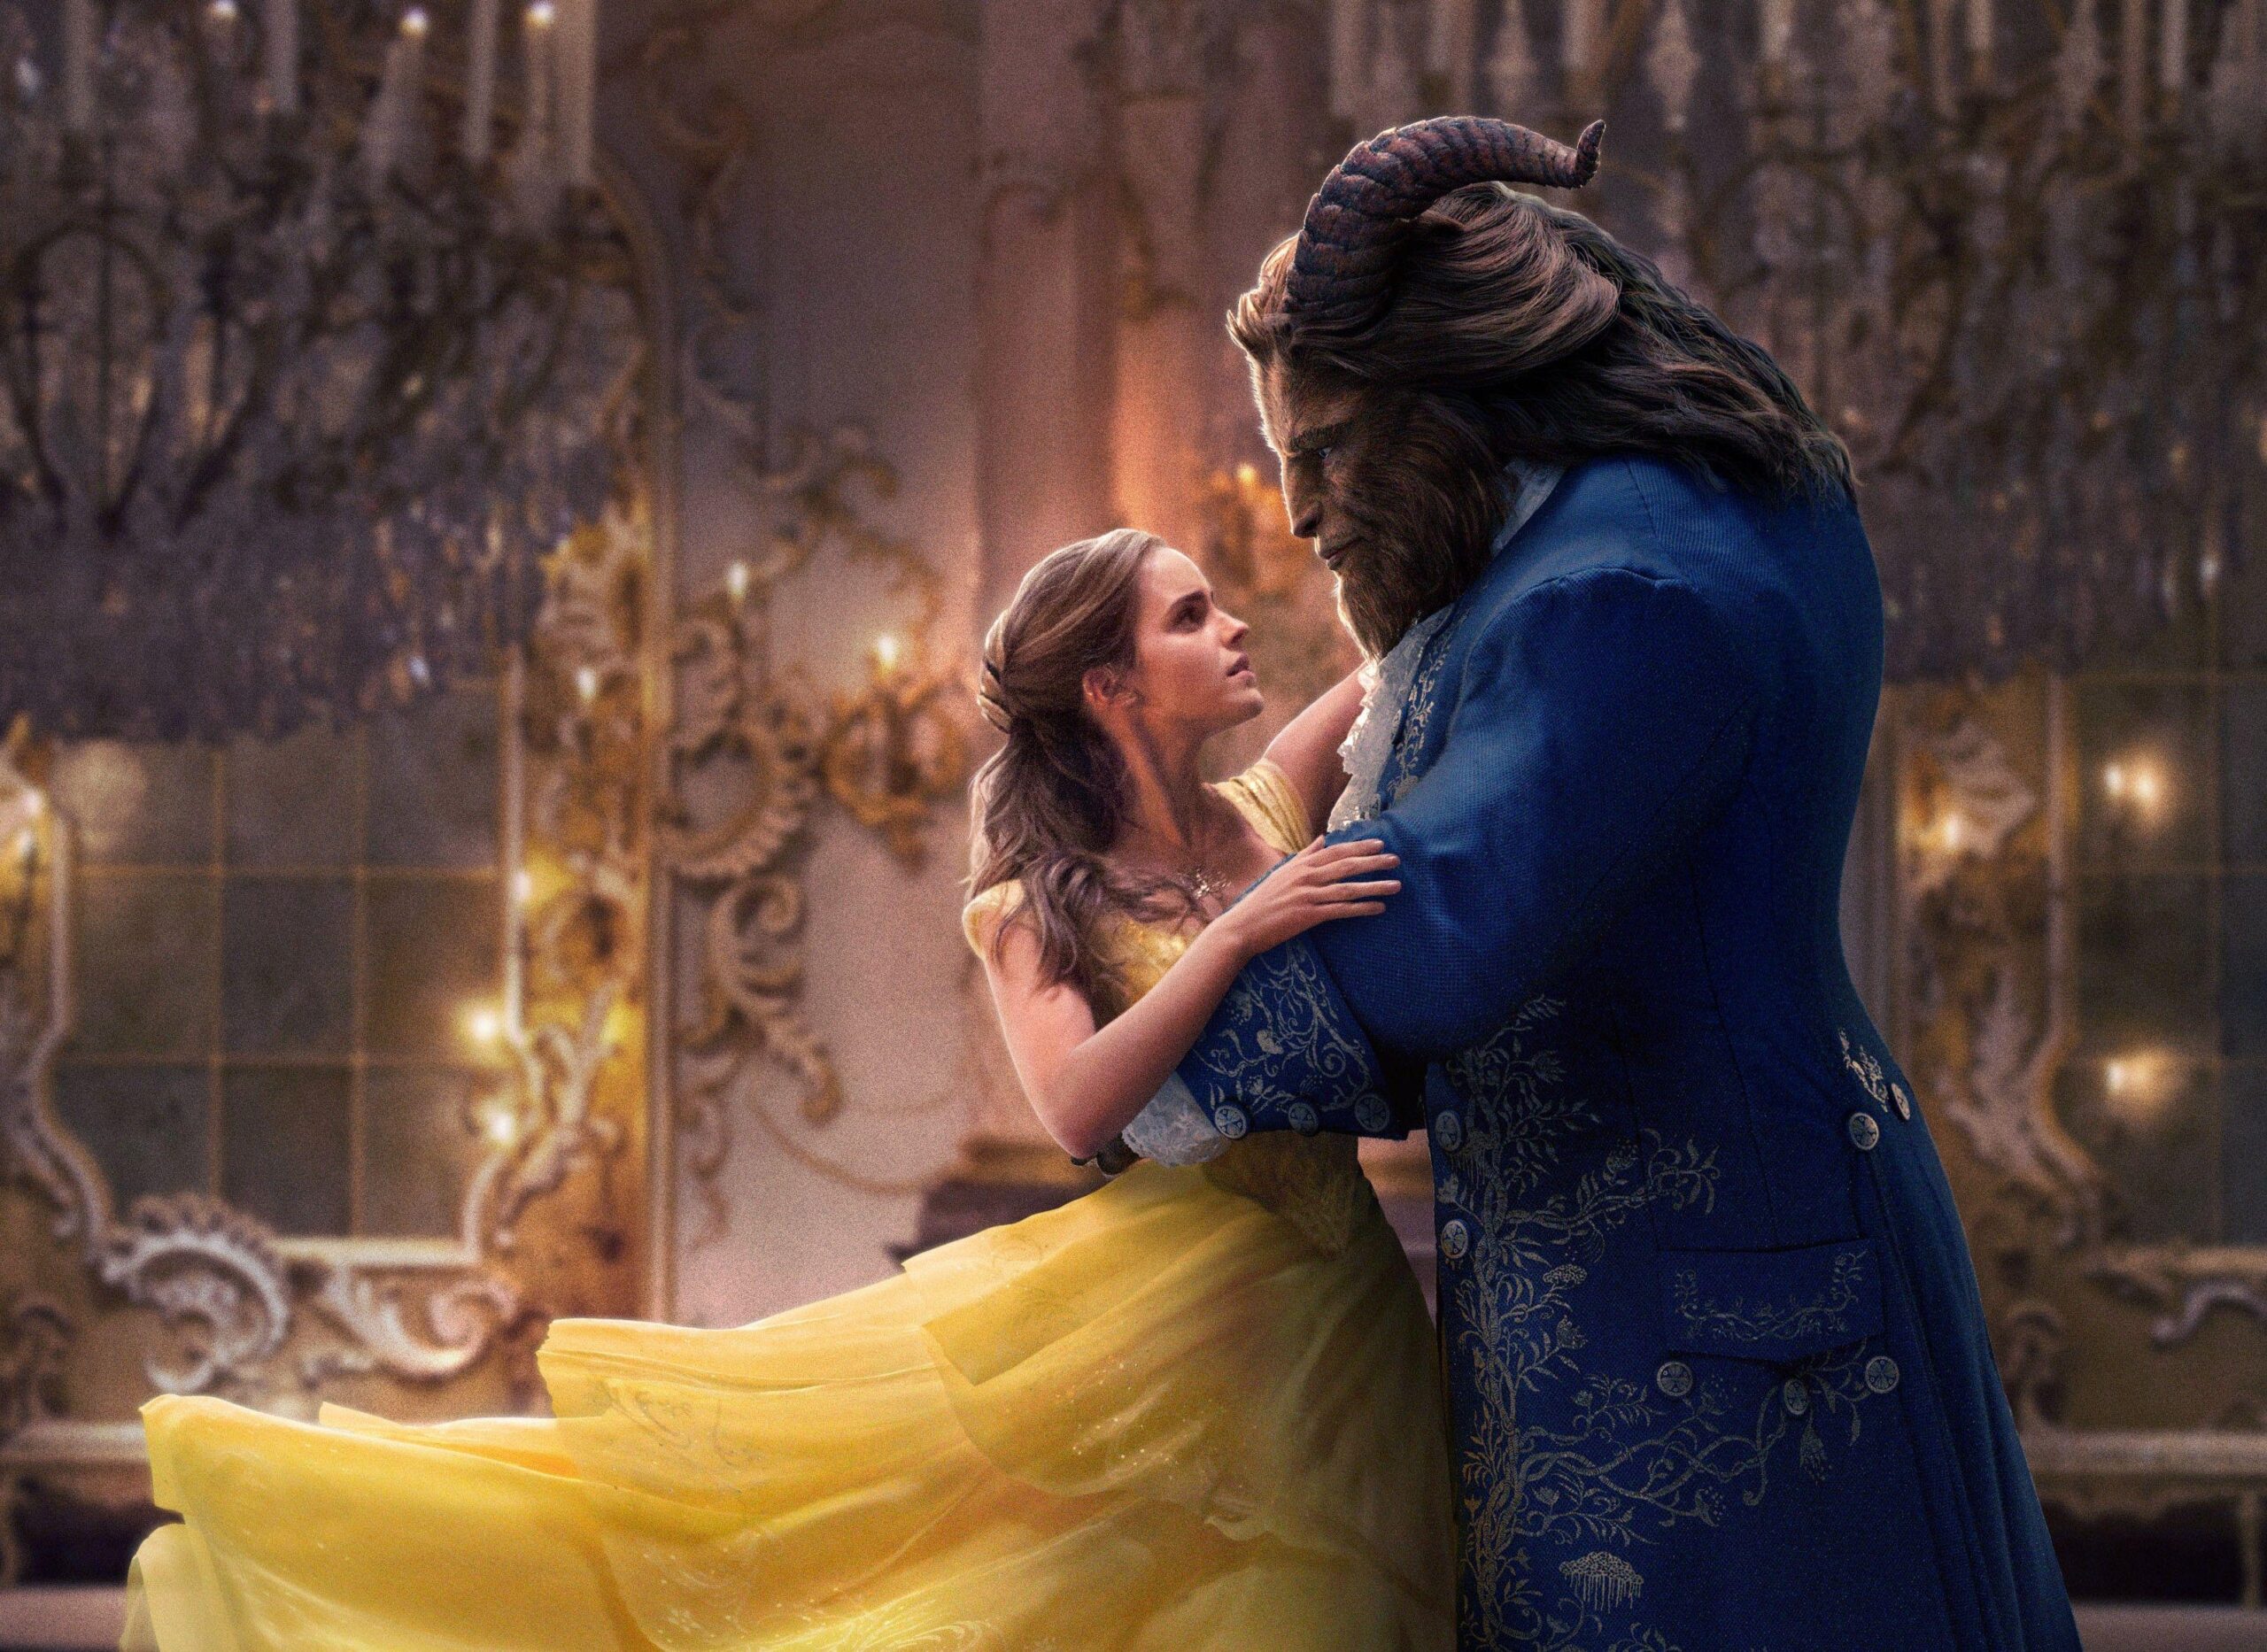 Beauty And The Beast 4K Ultra Hd Wallpapers, Beauty And The Beast, Cartoons